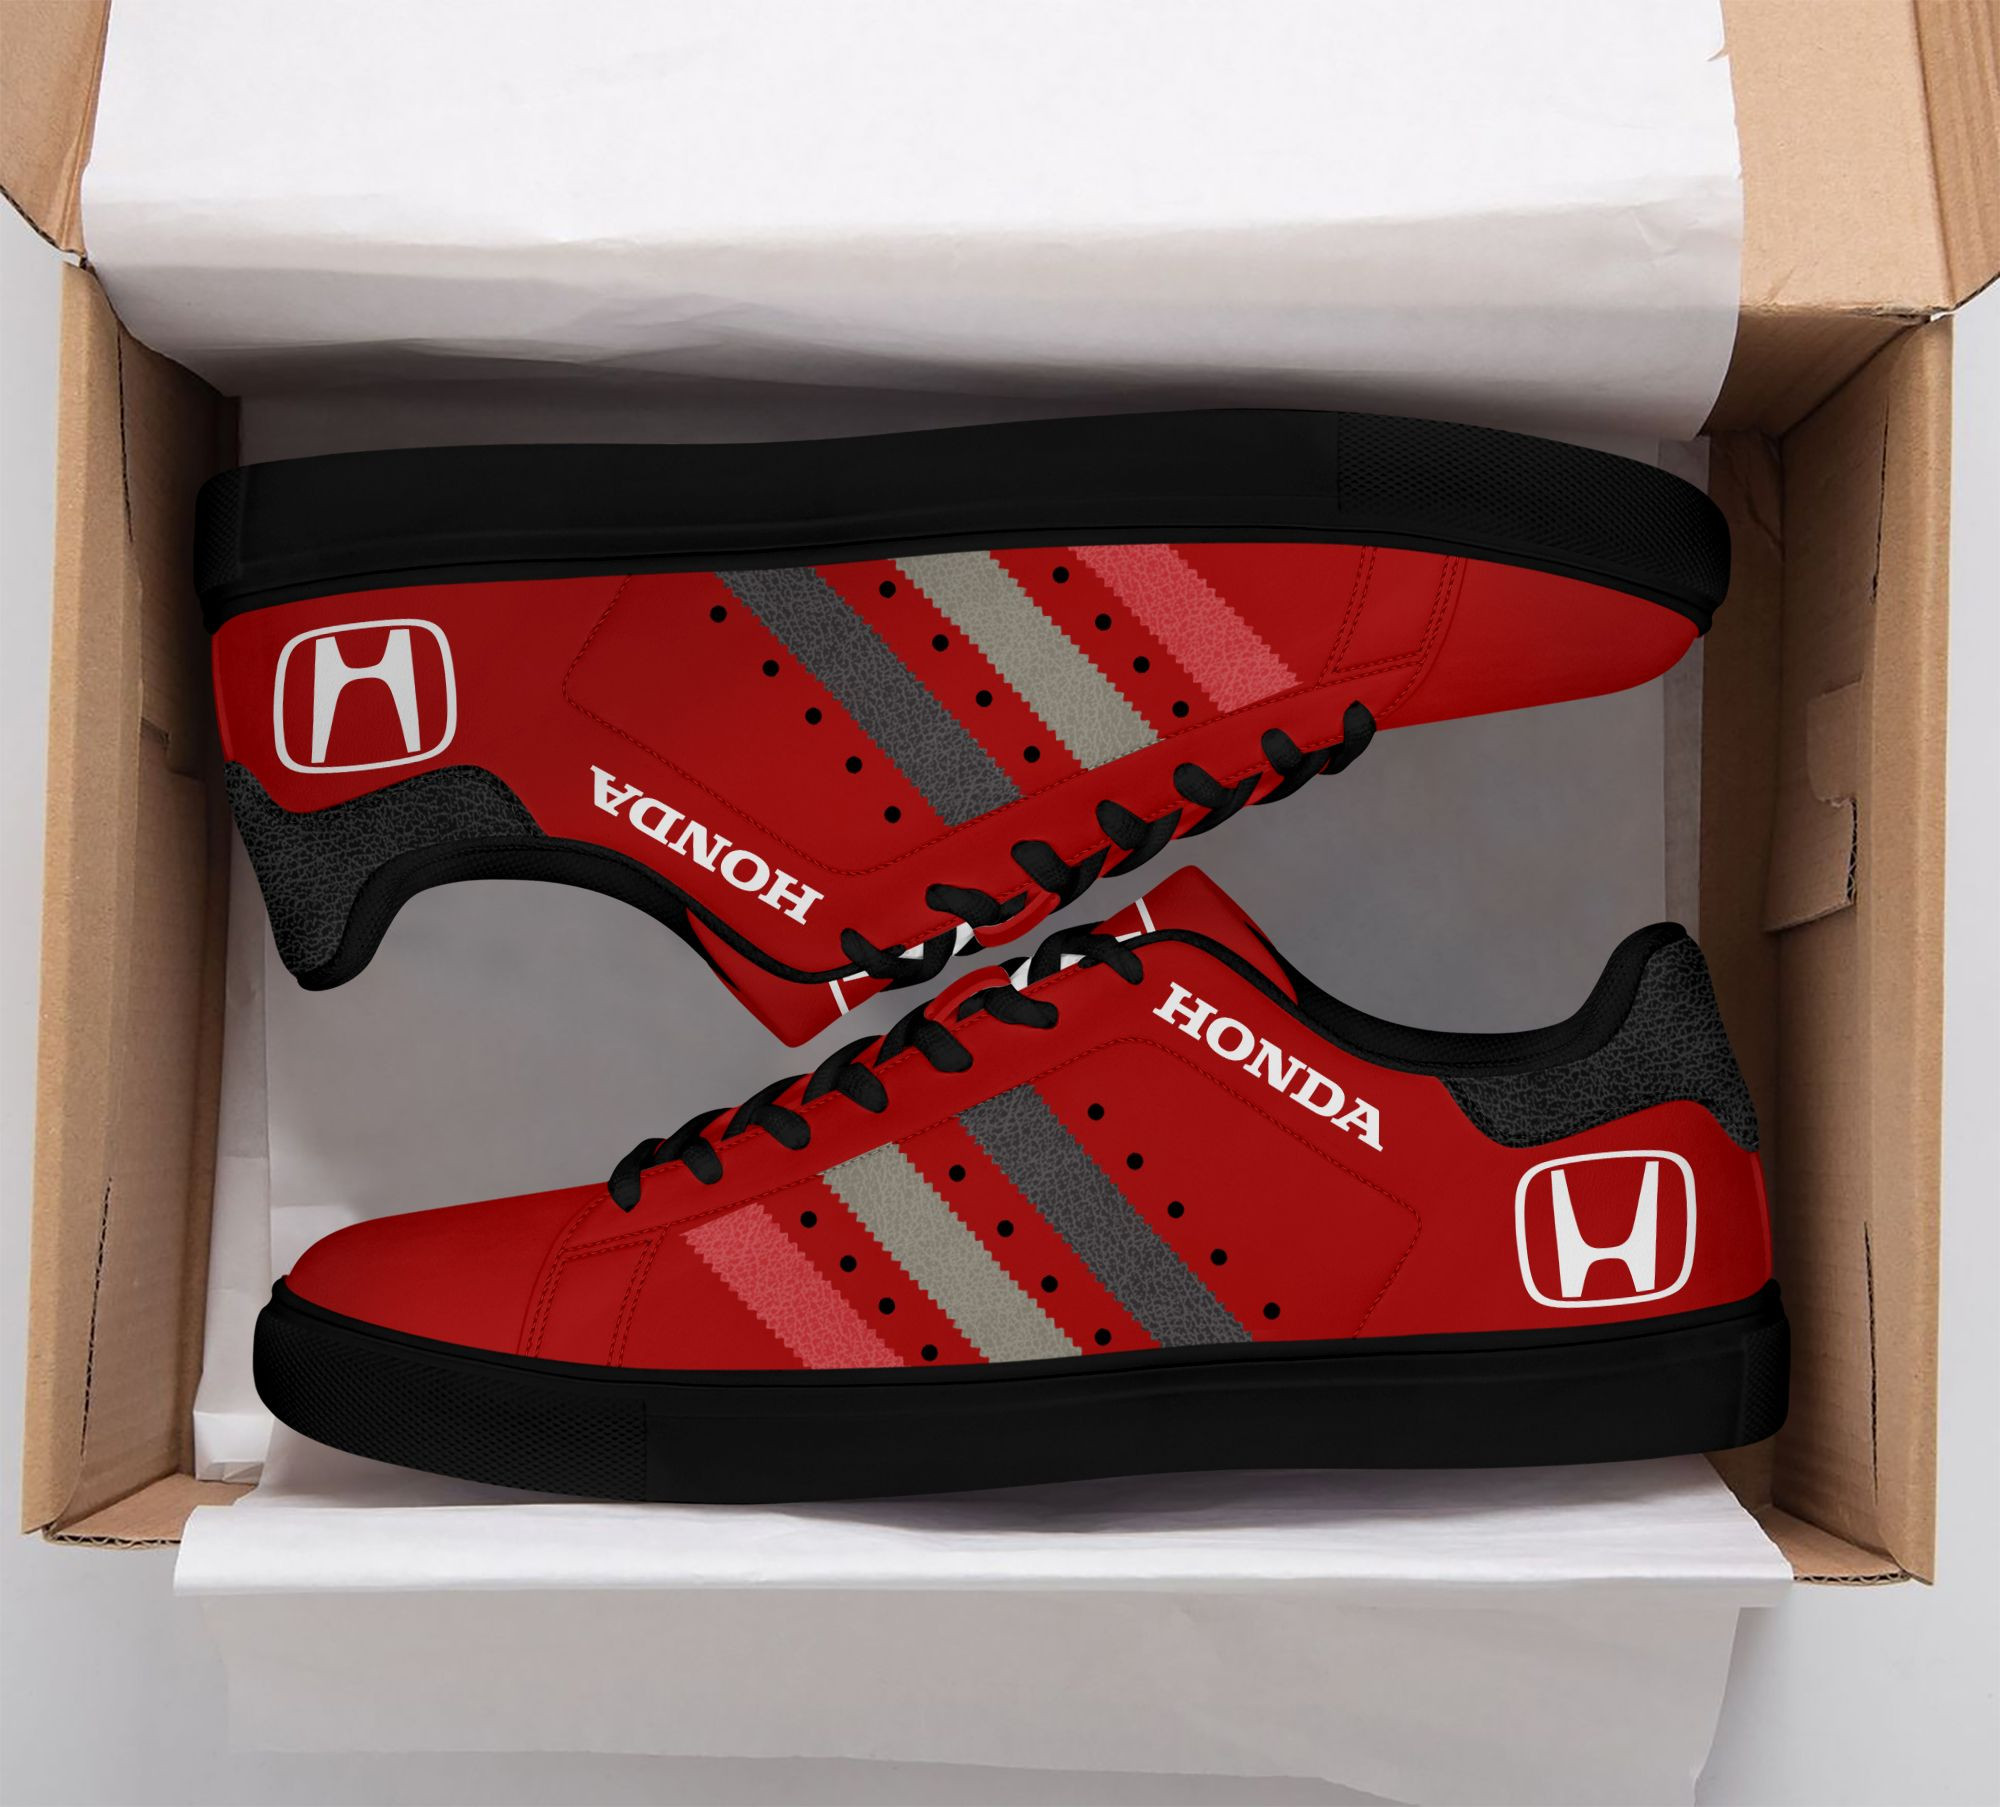 Honda An-Hl St Smith Shoes Ver 4 (Dark Red)